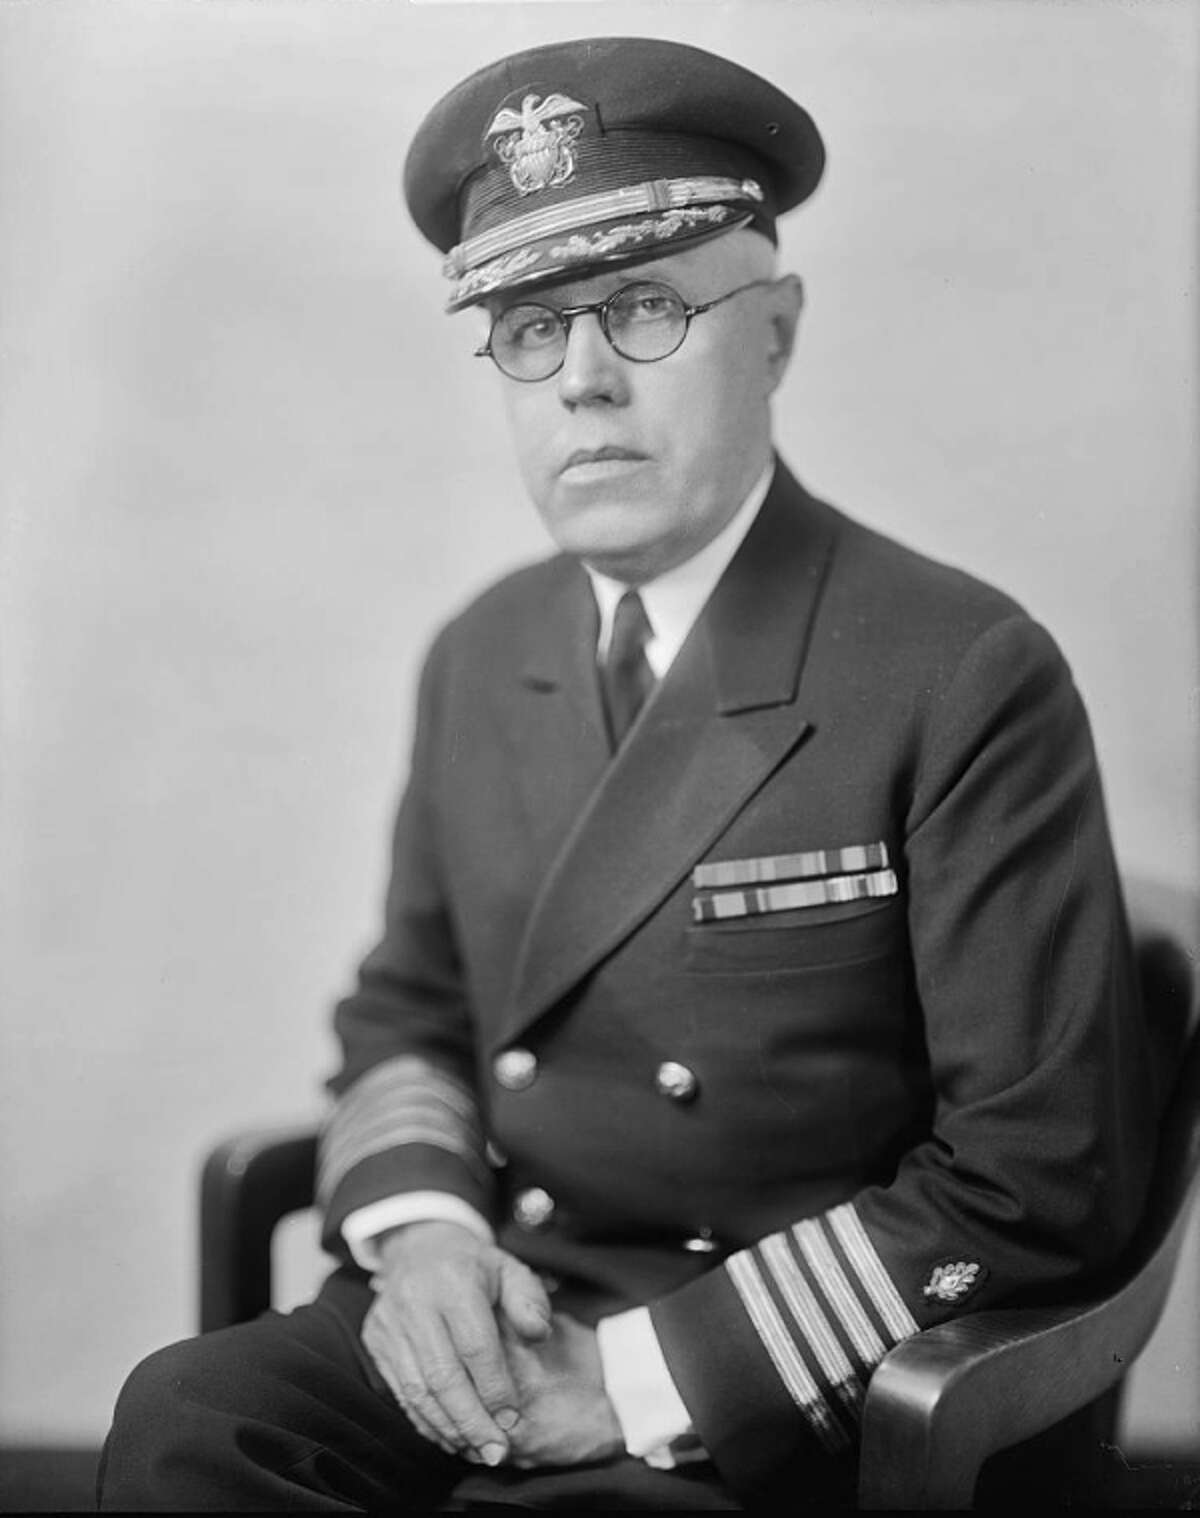 Commander Percival S. Rossiter was the medical offical in charge of the quarantine that successfully protected nearly 6000 inhabitants of Yerba Buena Island from the Spanish Flu in 1918.